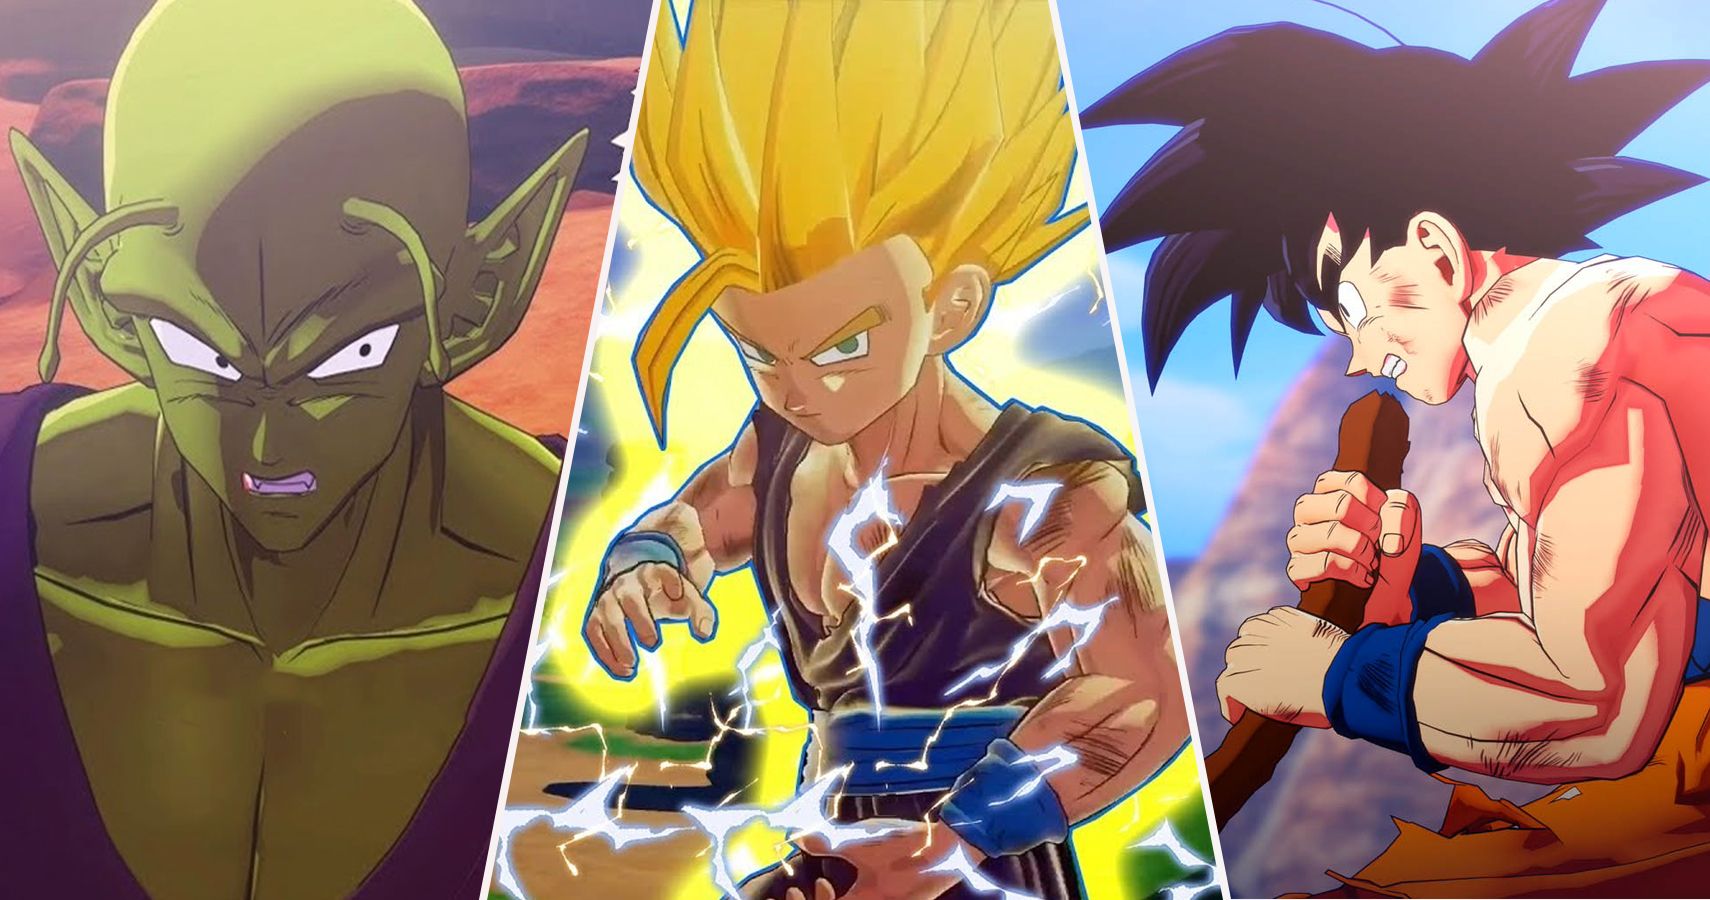 Dragon Ball Z Kakarot: Every Playable Character (Ranked By How Much You Get To Play Them)